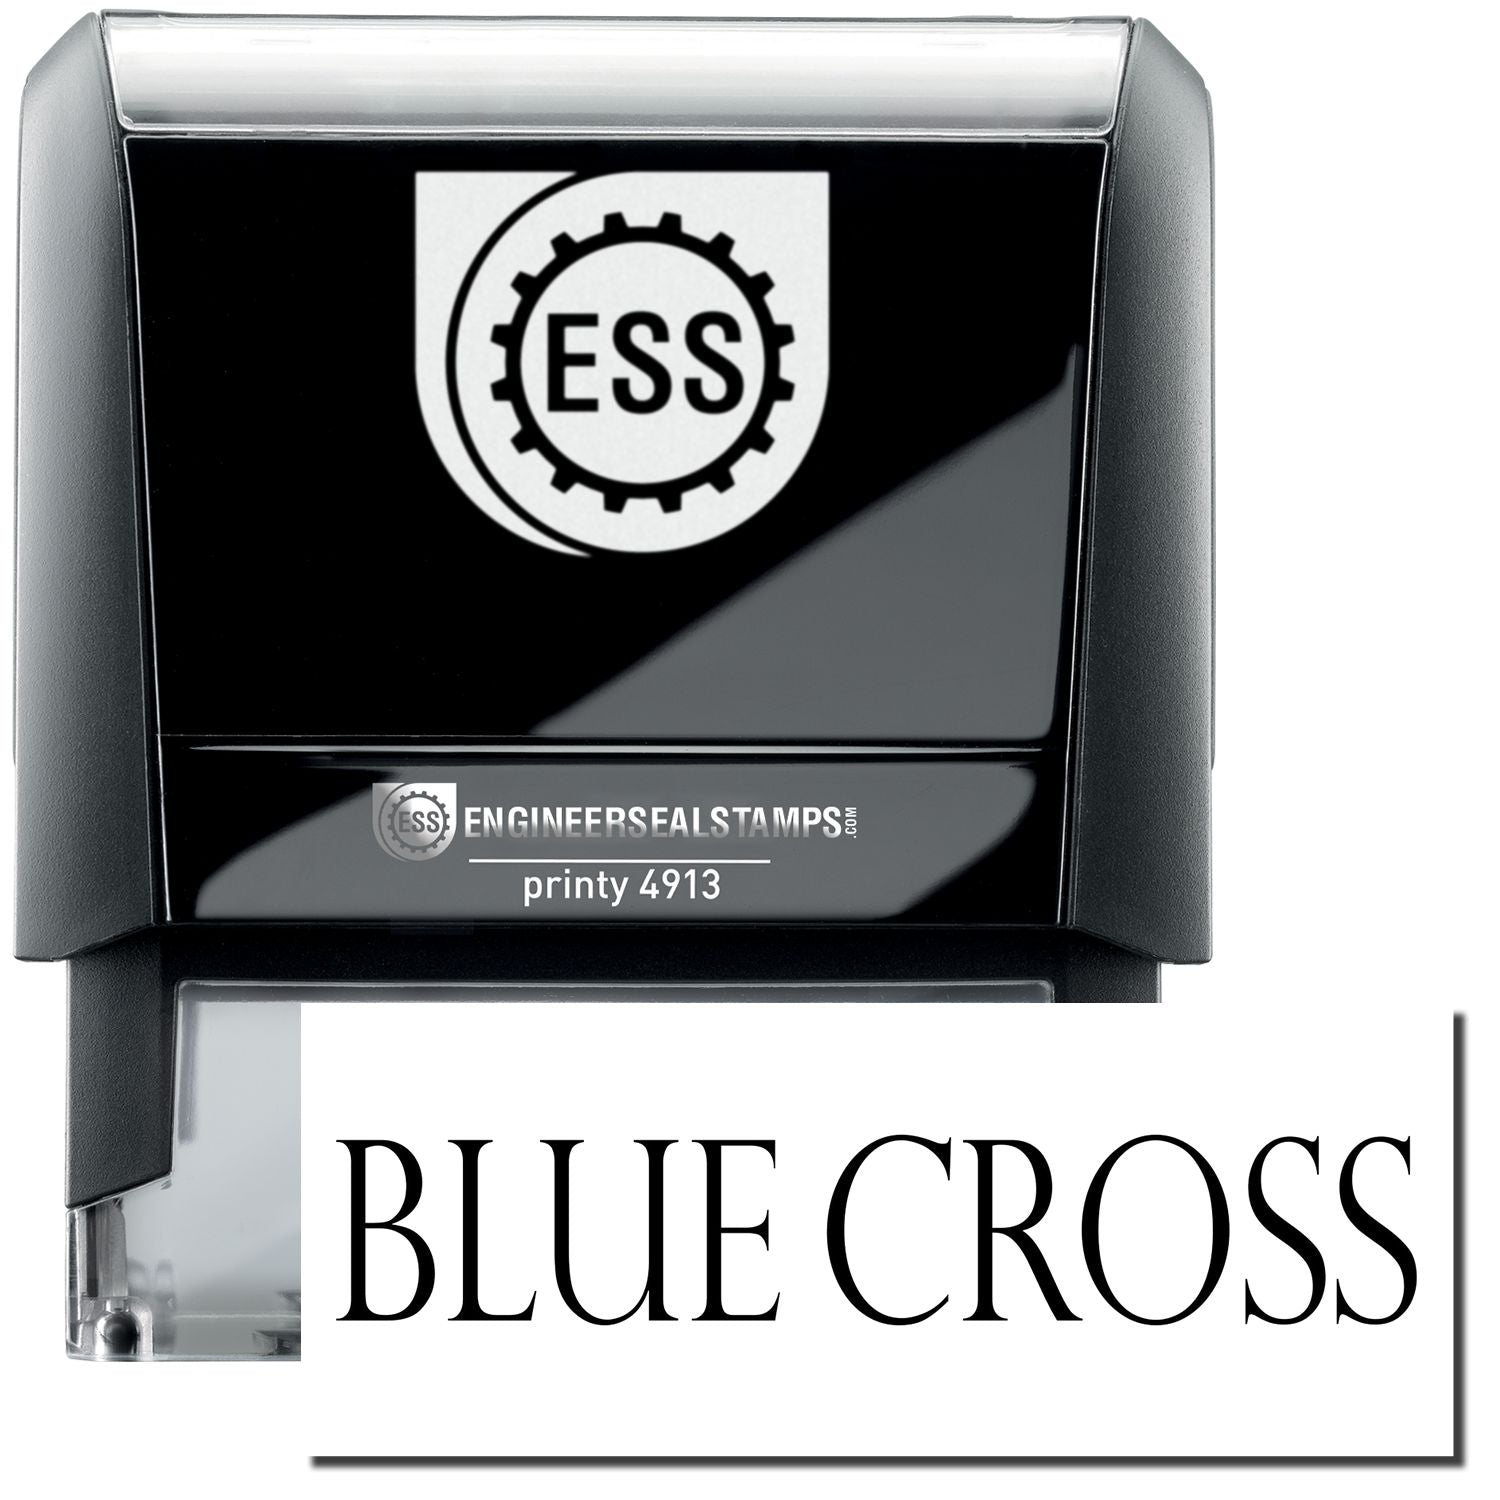 A self-inking stamp with a stamped image showing how the text "BLUE CROSS" in a large font is displayed by it.